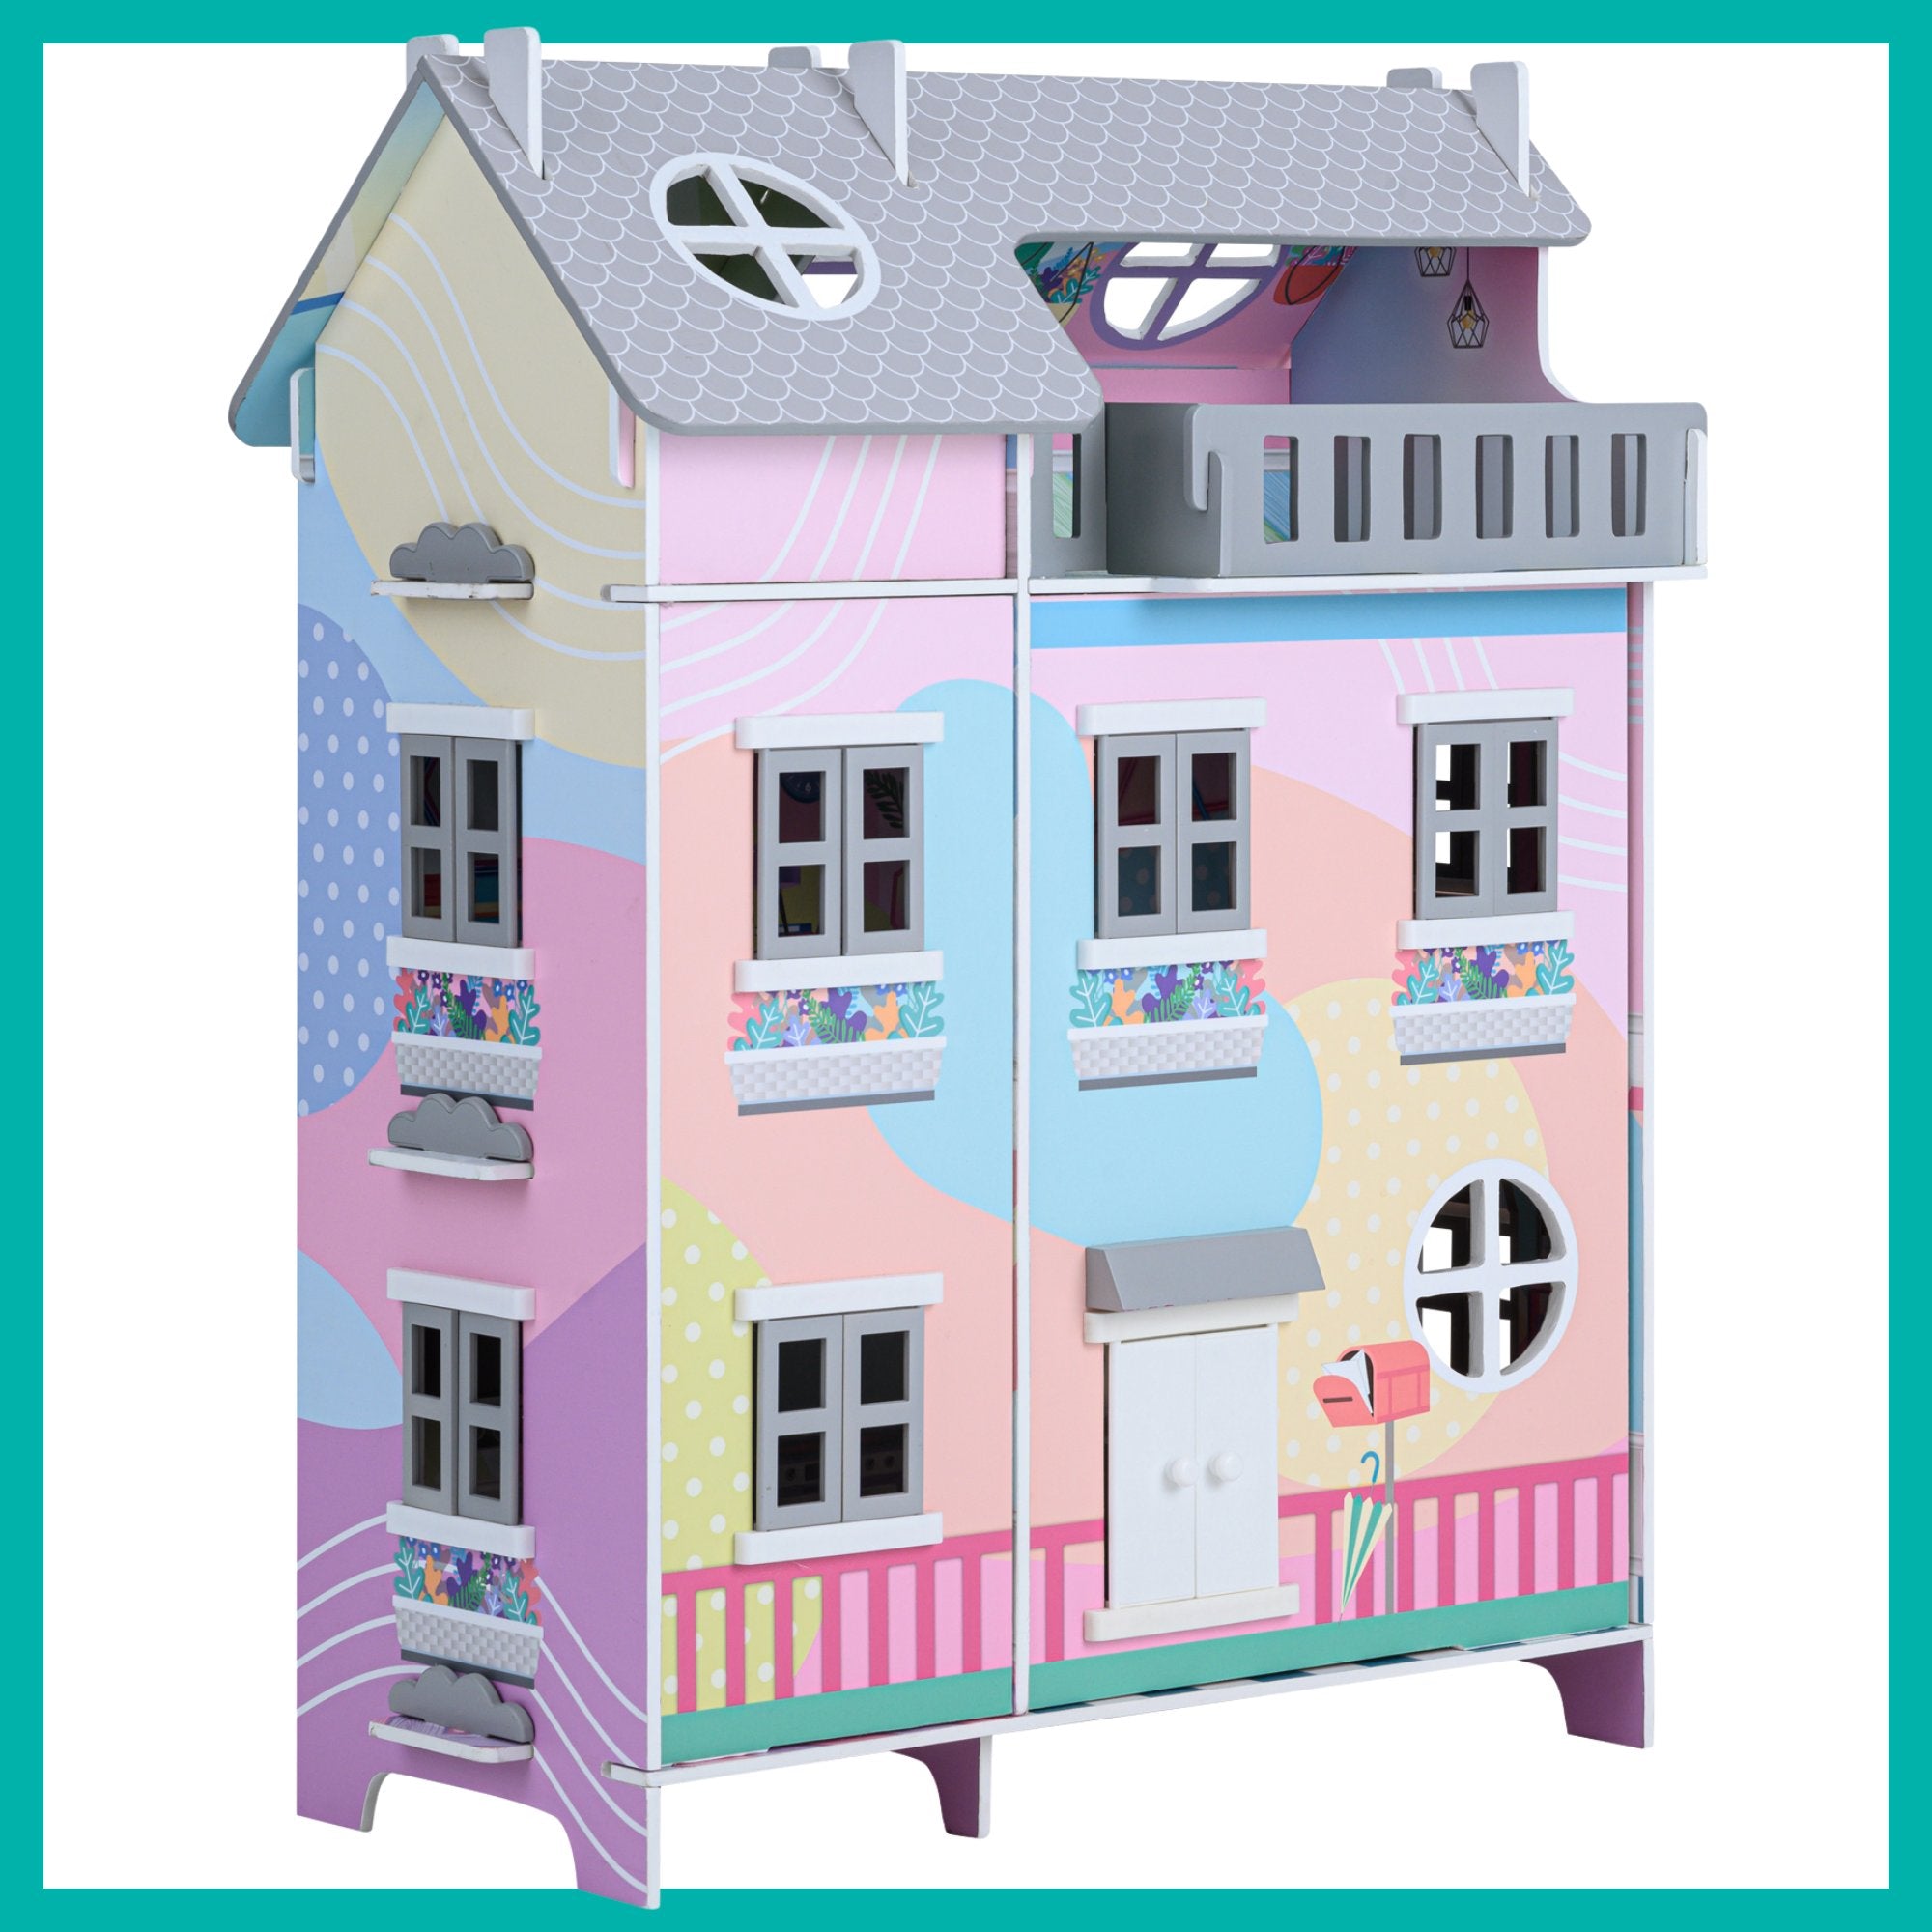 Image shows a three story, furnished dollhouse for 12 inch dolls.